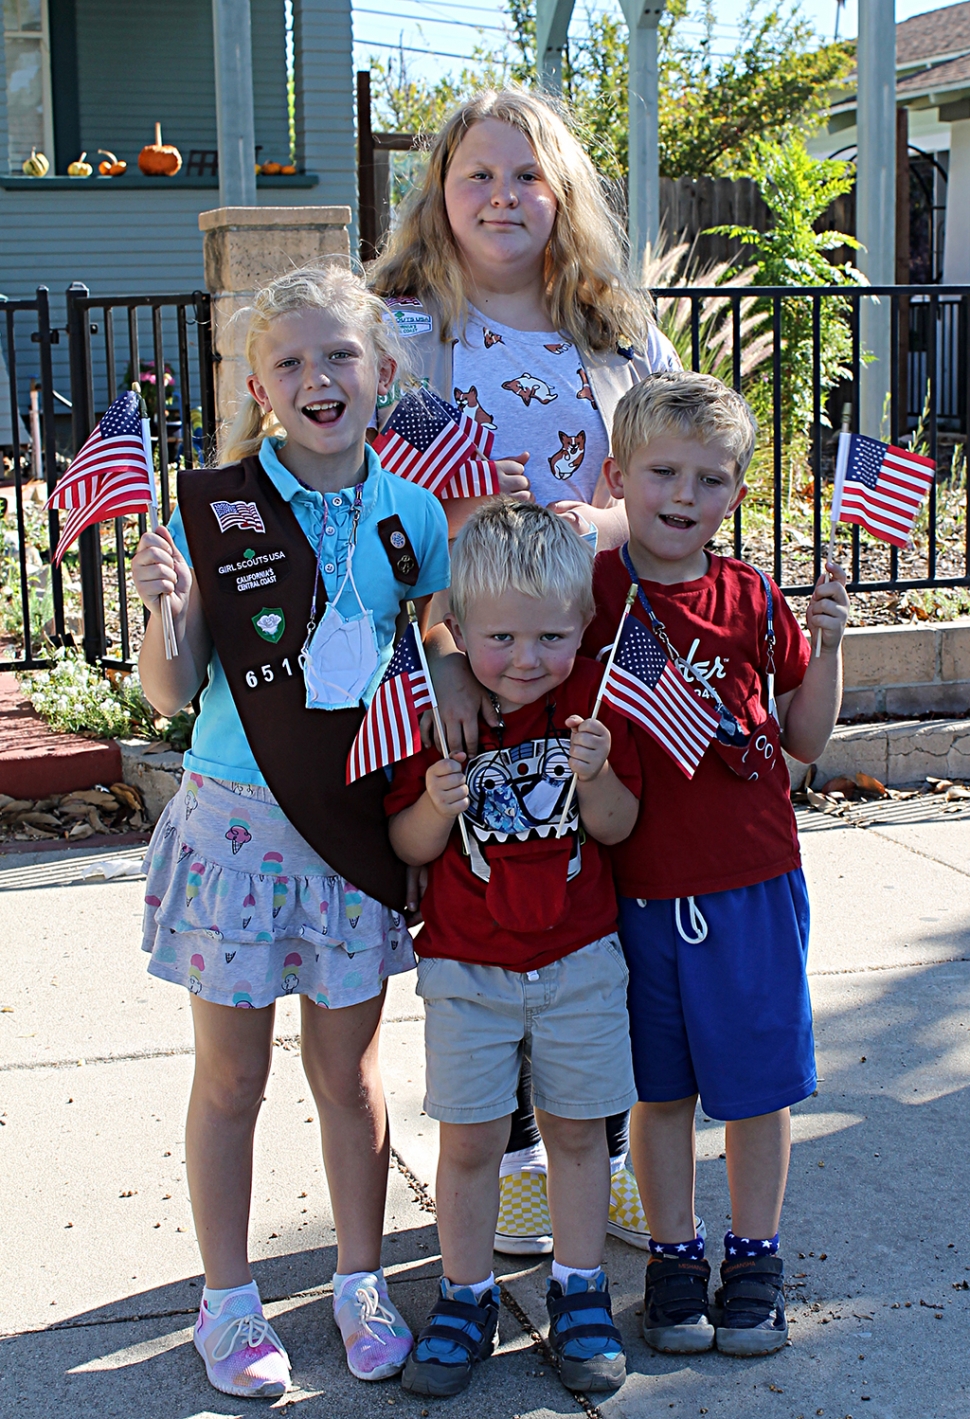 Emma, wearing her Fillmore with Girl Scout Troop 6510 sash, Fiona, James, and William are all smiling with their flags. They walked up and down Central Avenue before the parade and handed out American flags to parade attendees to wave as the Veterans took their cruise downtown.